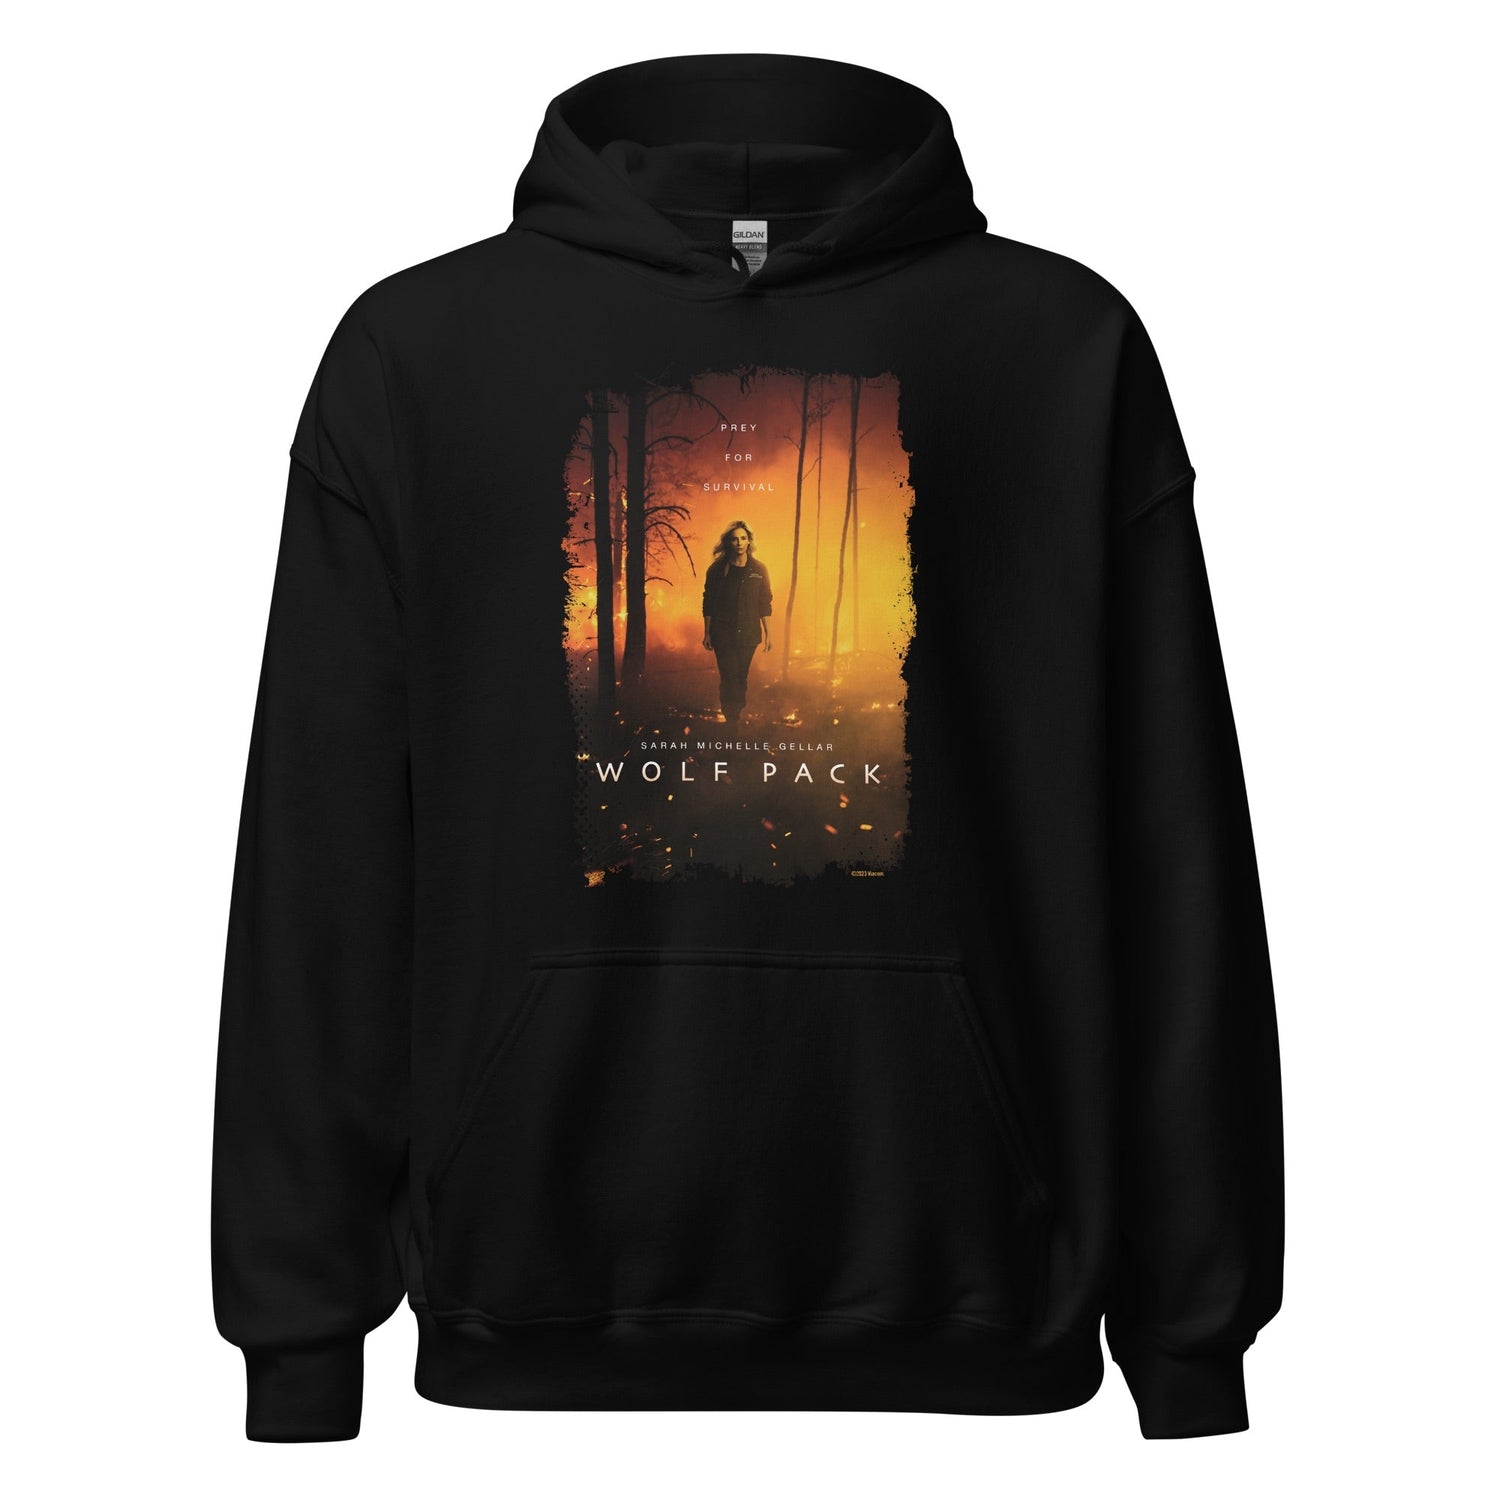 Wolf Pack Prey For Survival Adult Hooded Sweatshirt - Paramount Shop